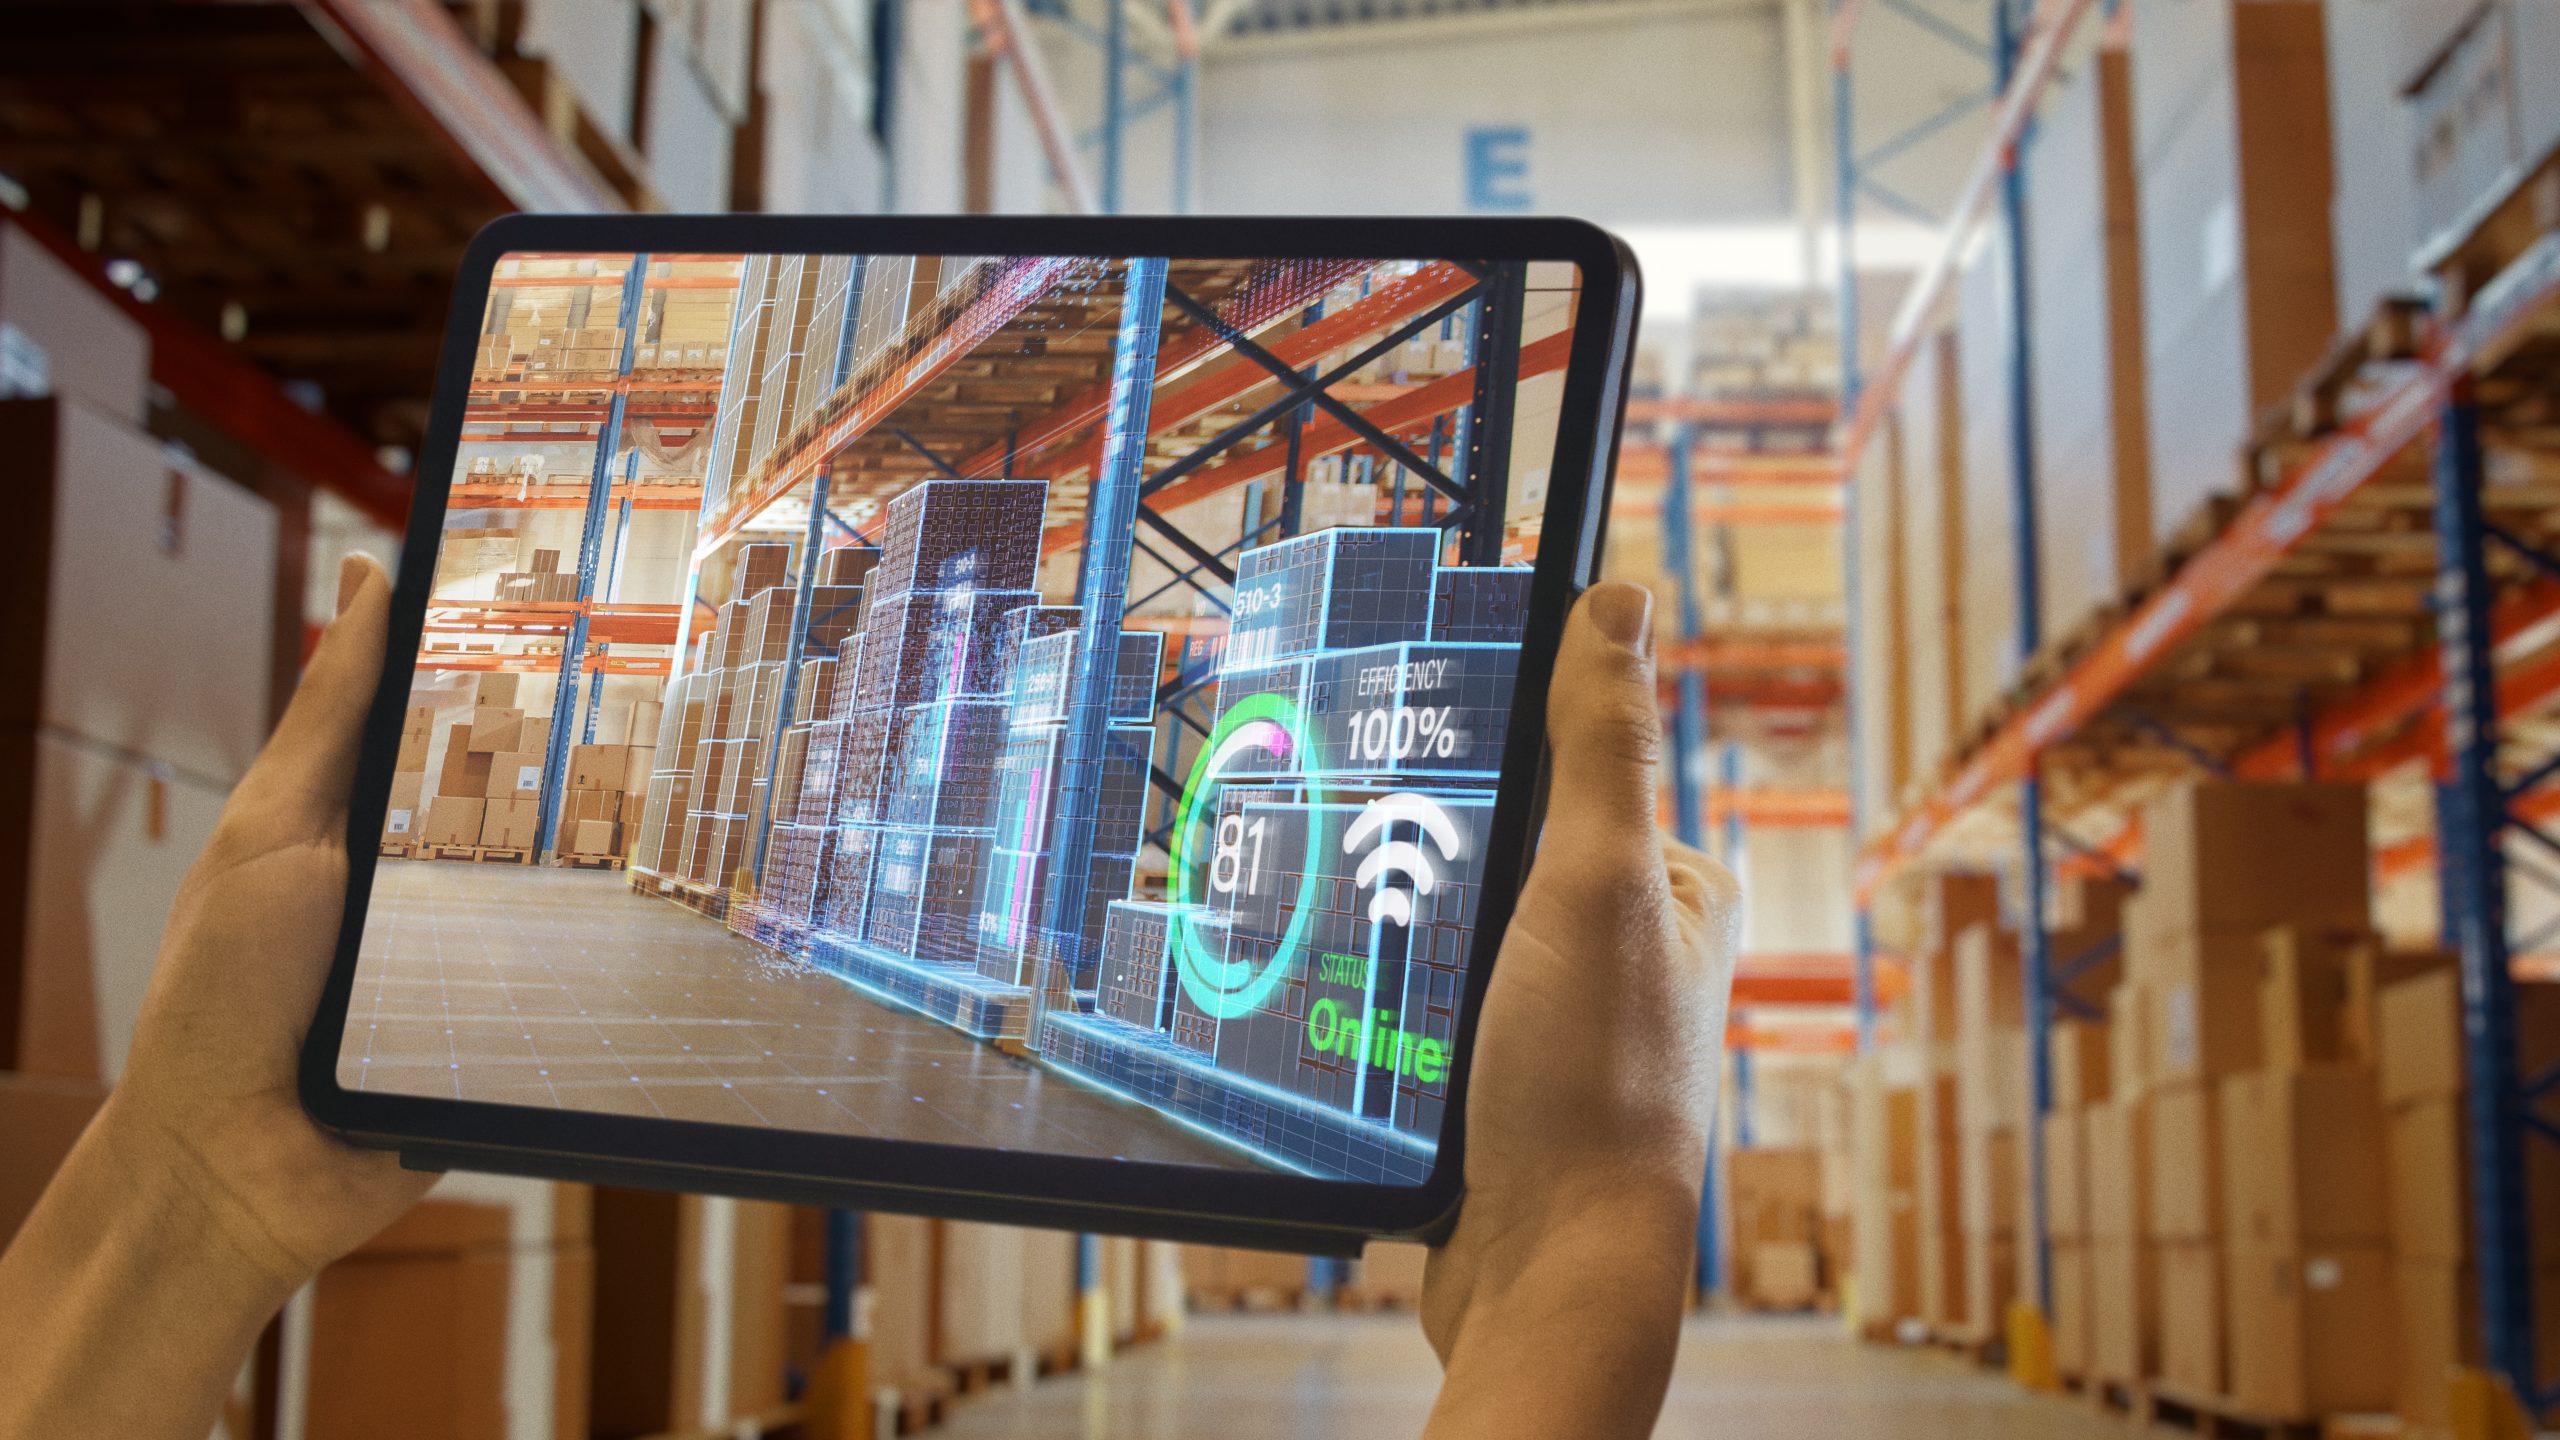 Futuristic Technology Warehouse: Worker Doing Inventory And Using Augmented Reality Application On Tablet. Digitalization Process Analyzes Products with Delivery Infographics in Distribution Center